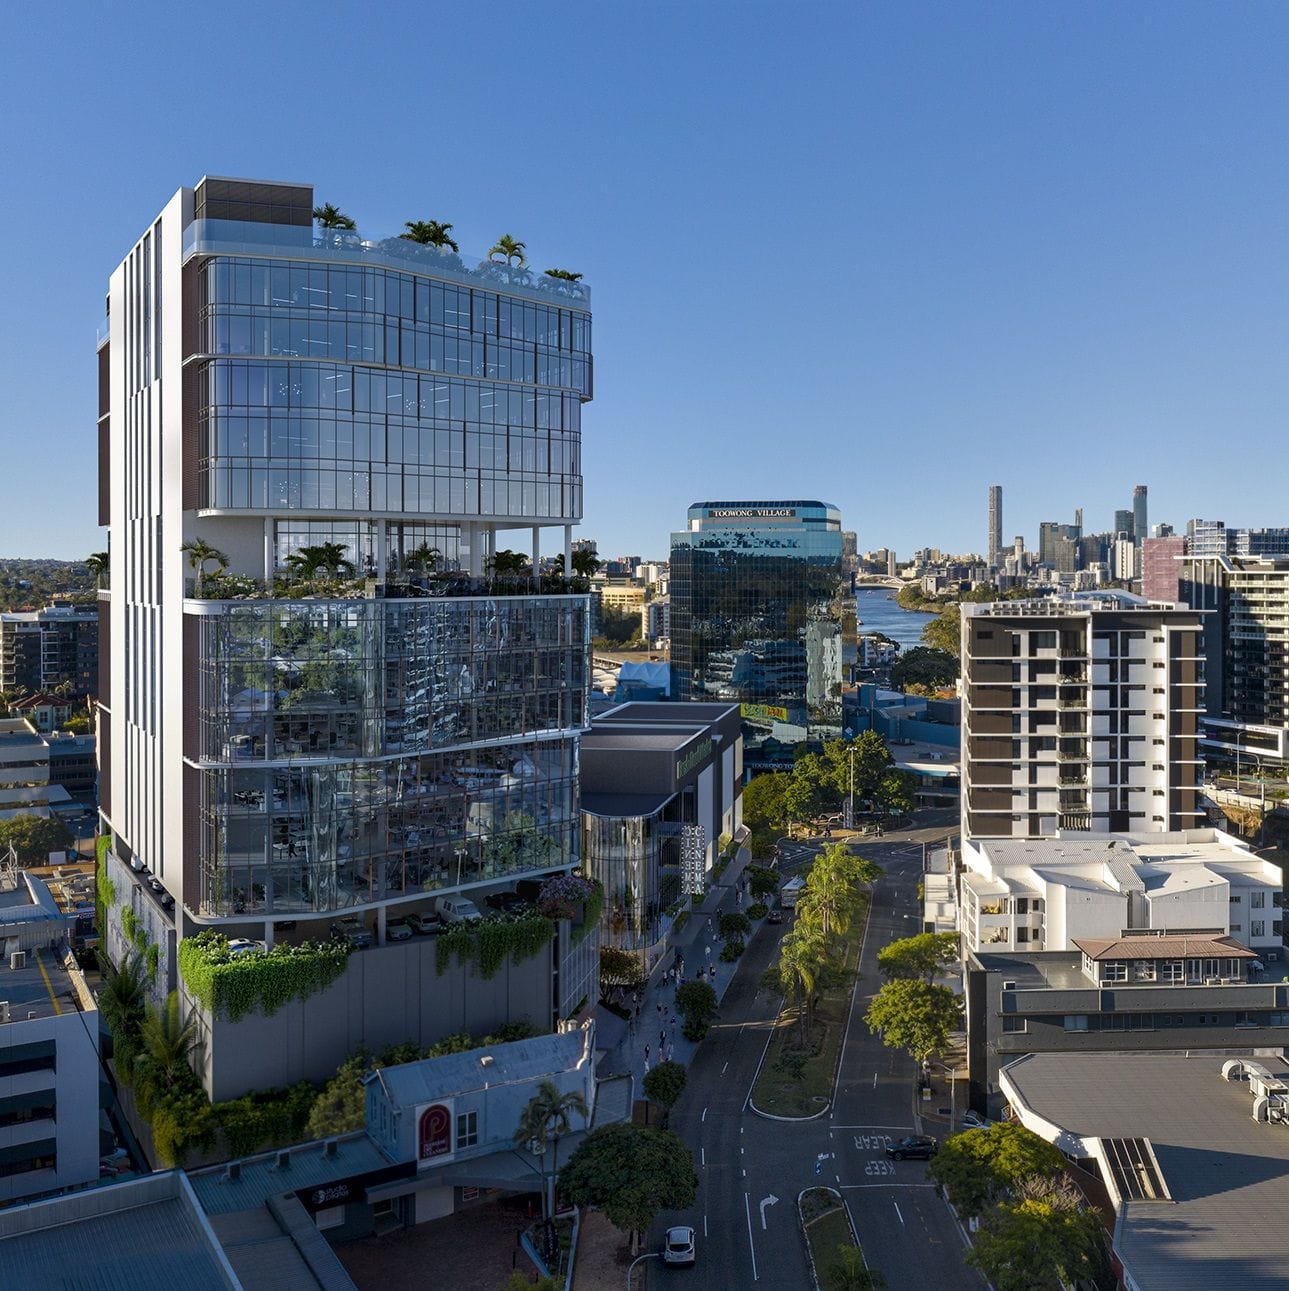 Brisbane City Council greenlights $450m Toowong project The Aviary